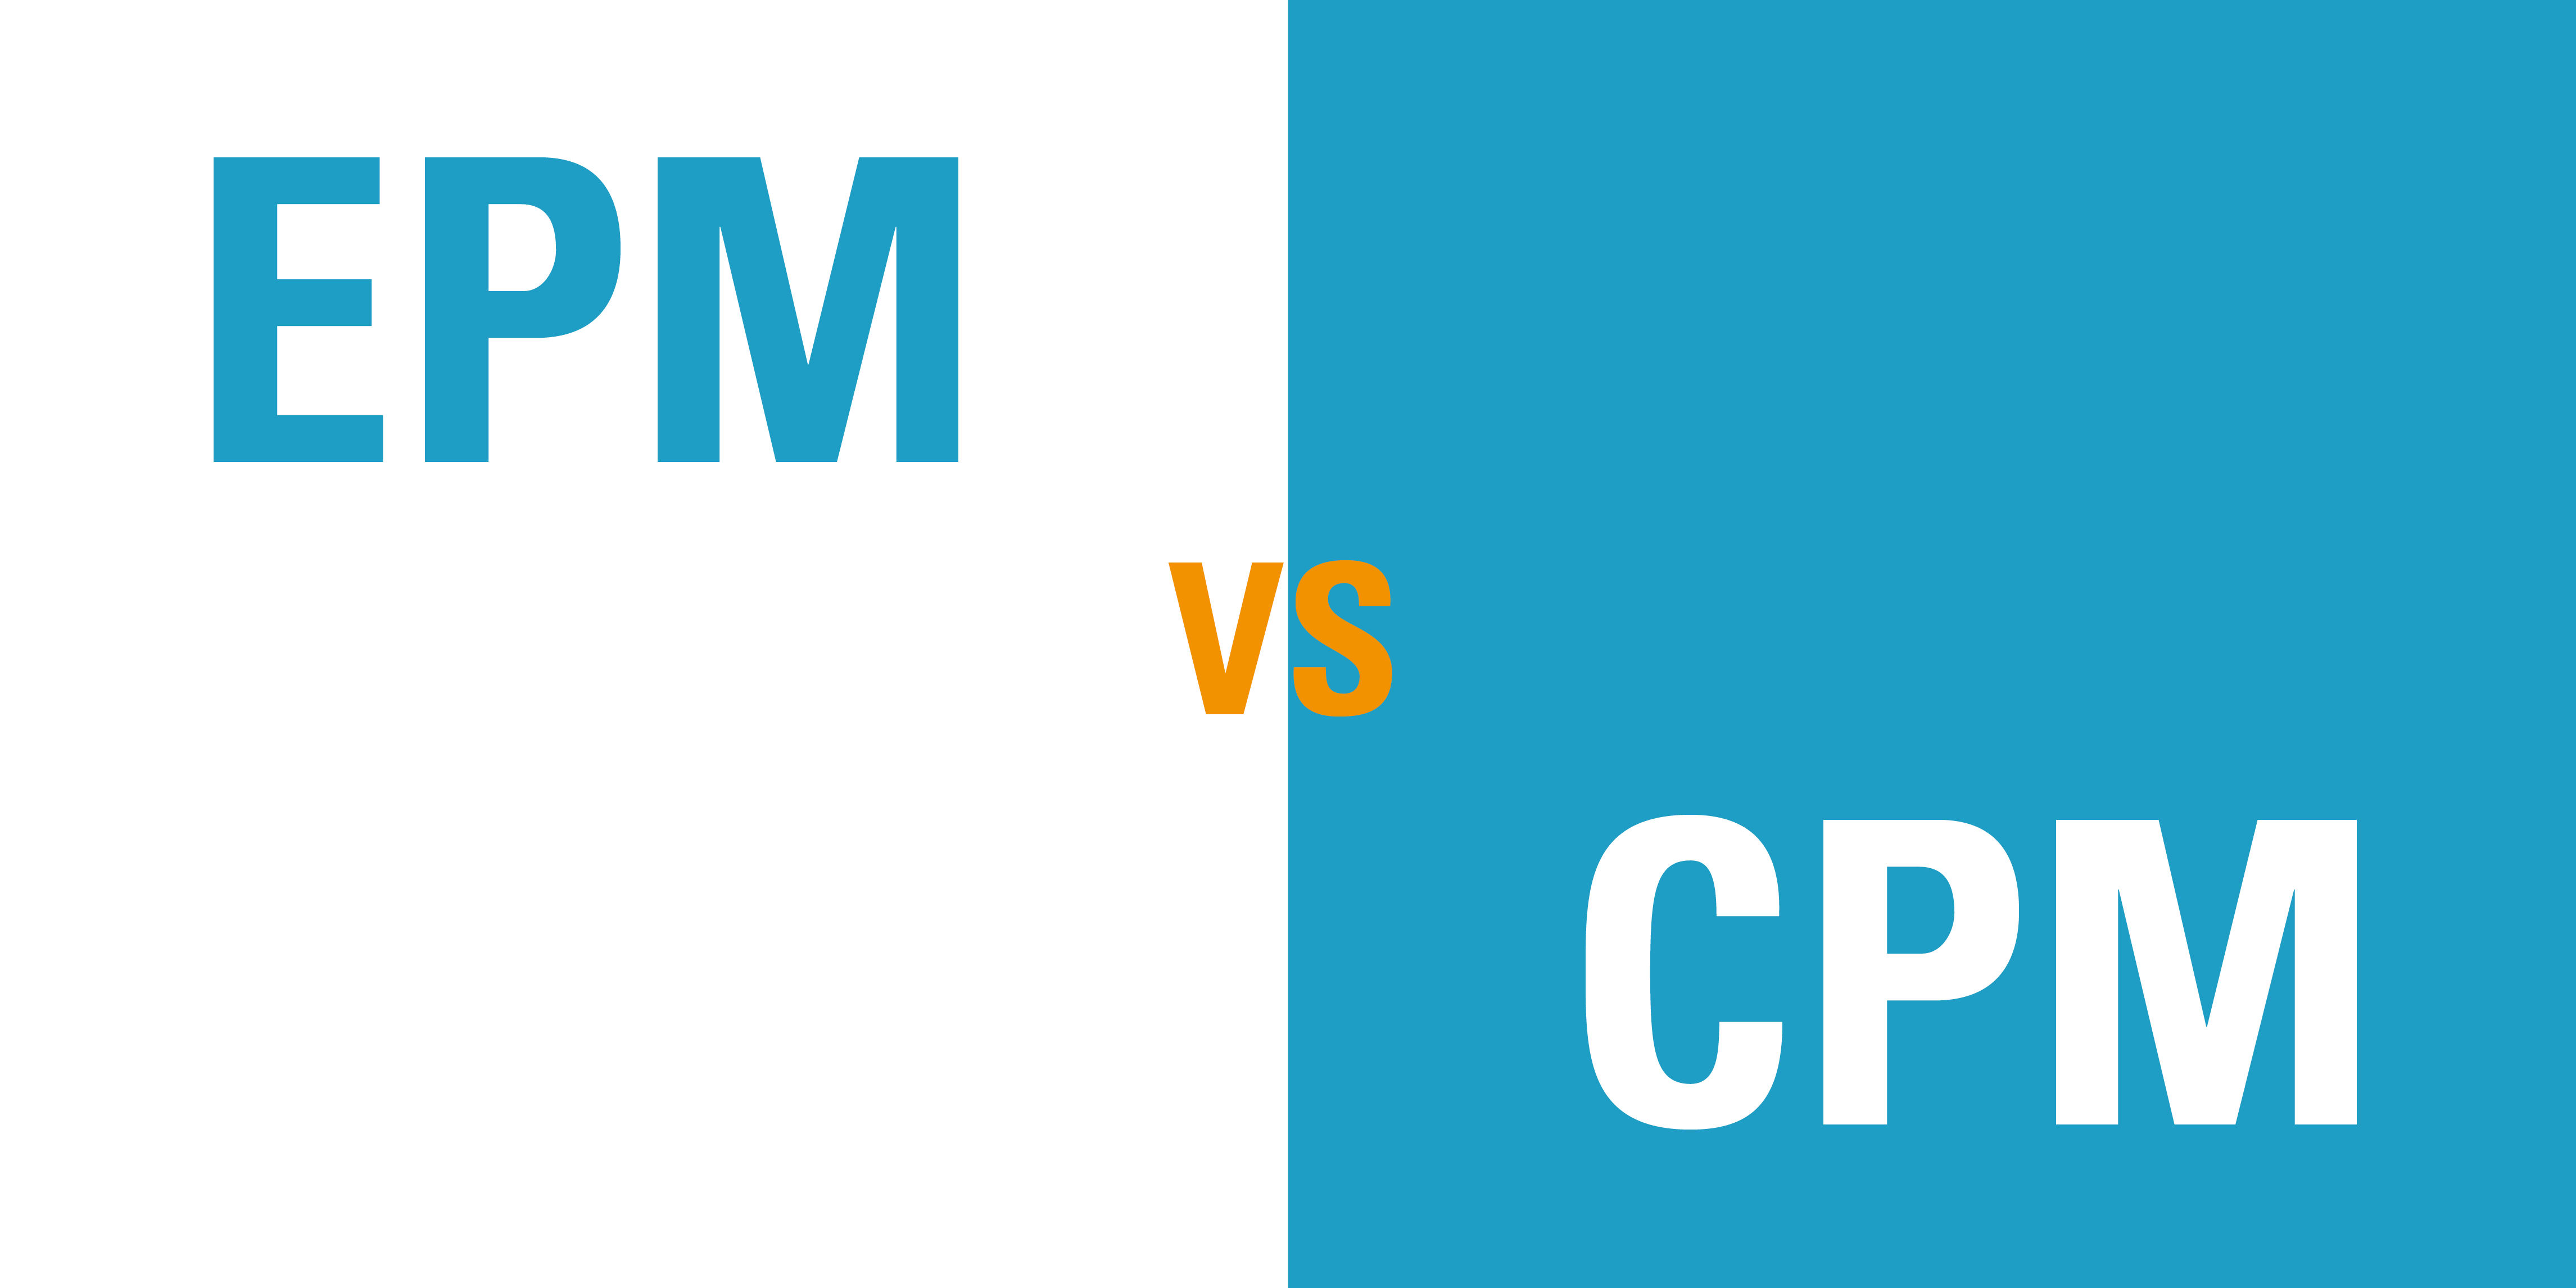 What is the difference between EPM and CPM